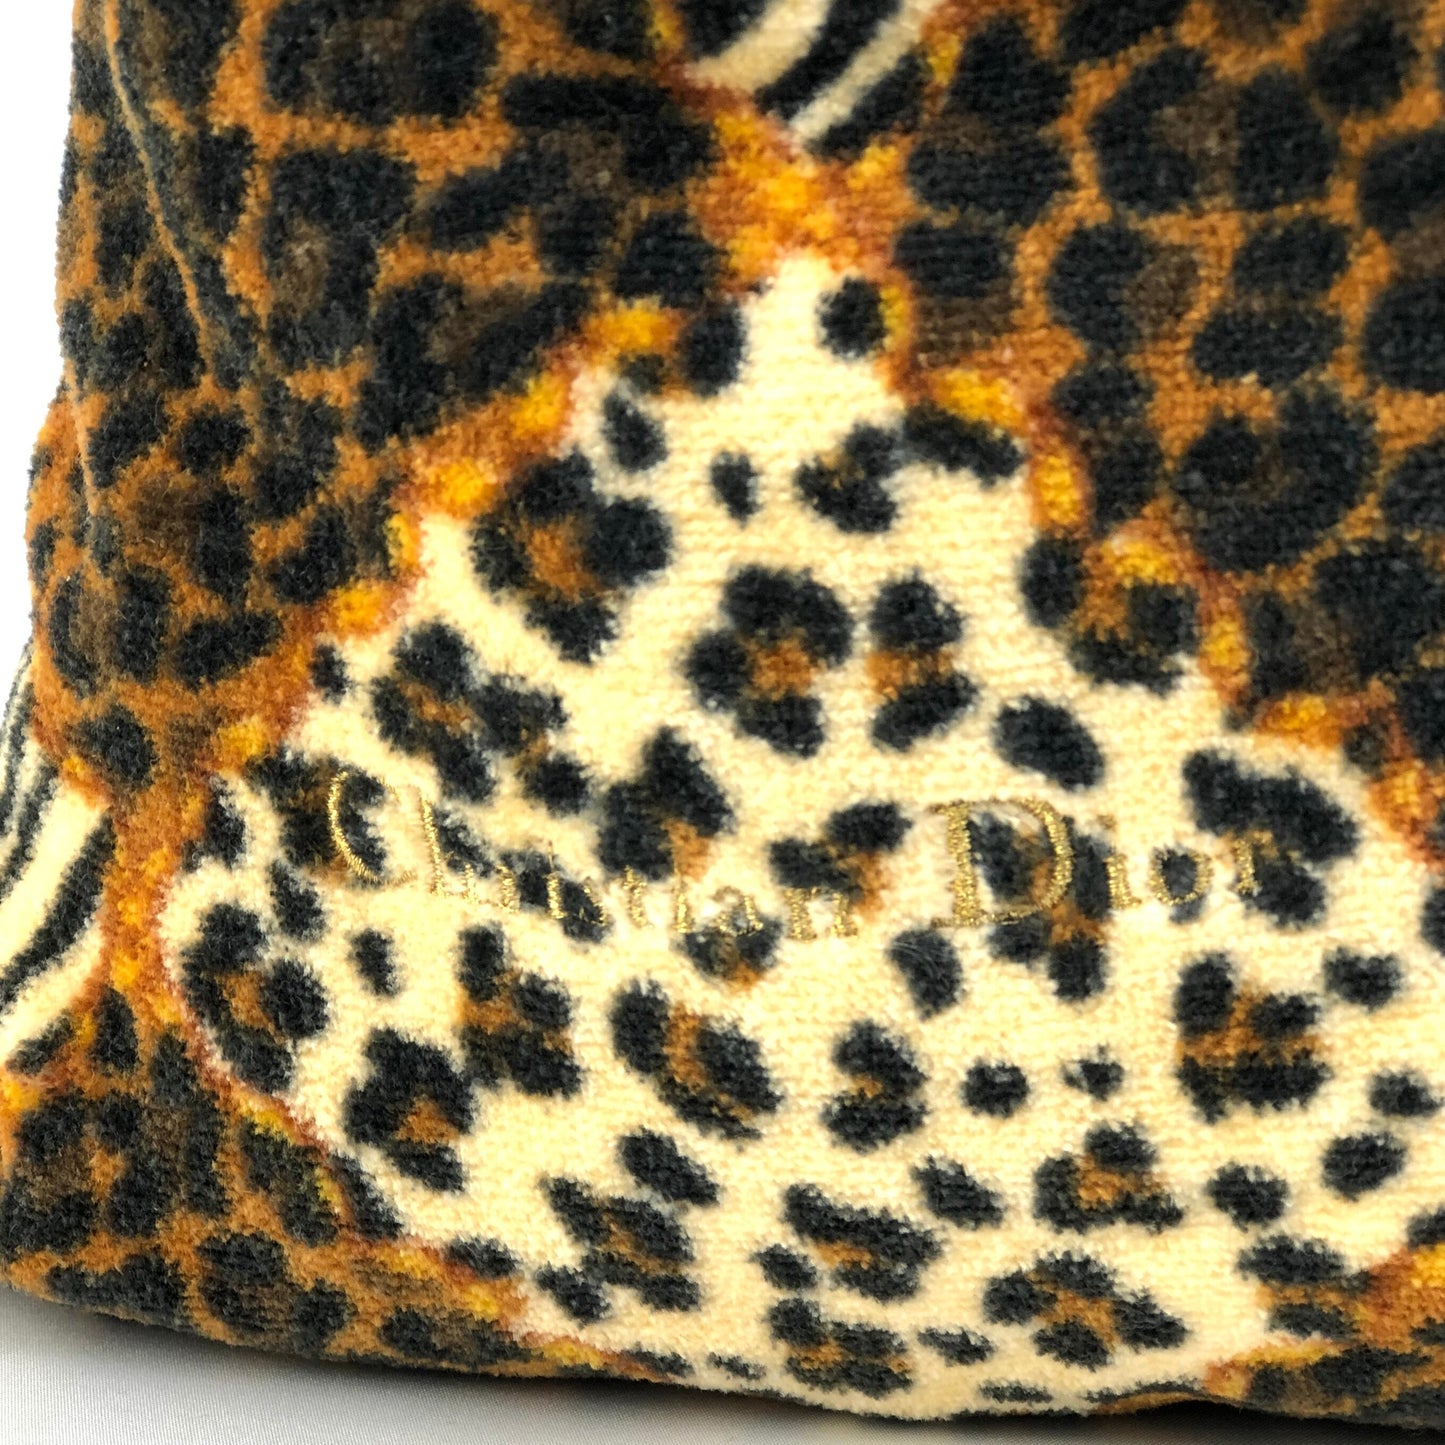 Christian Dior Leopard purse pile fabric pouch brown yellow vintage old dbky5v